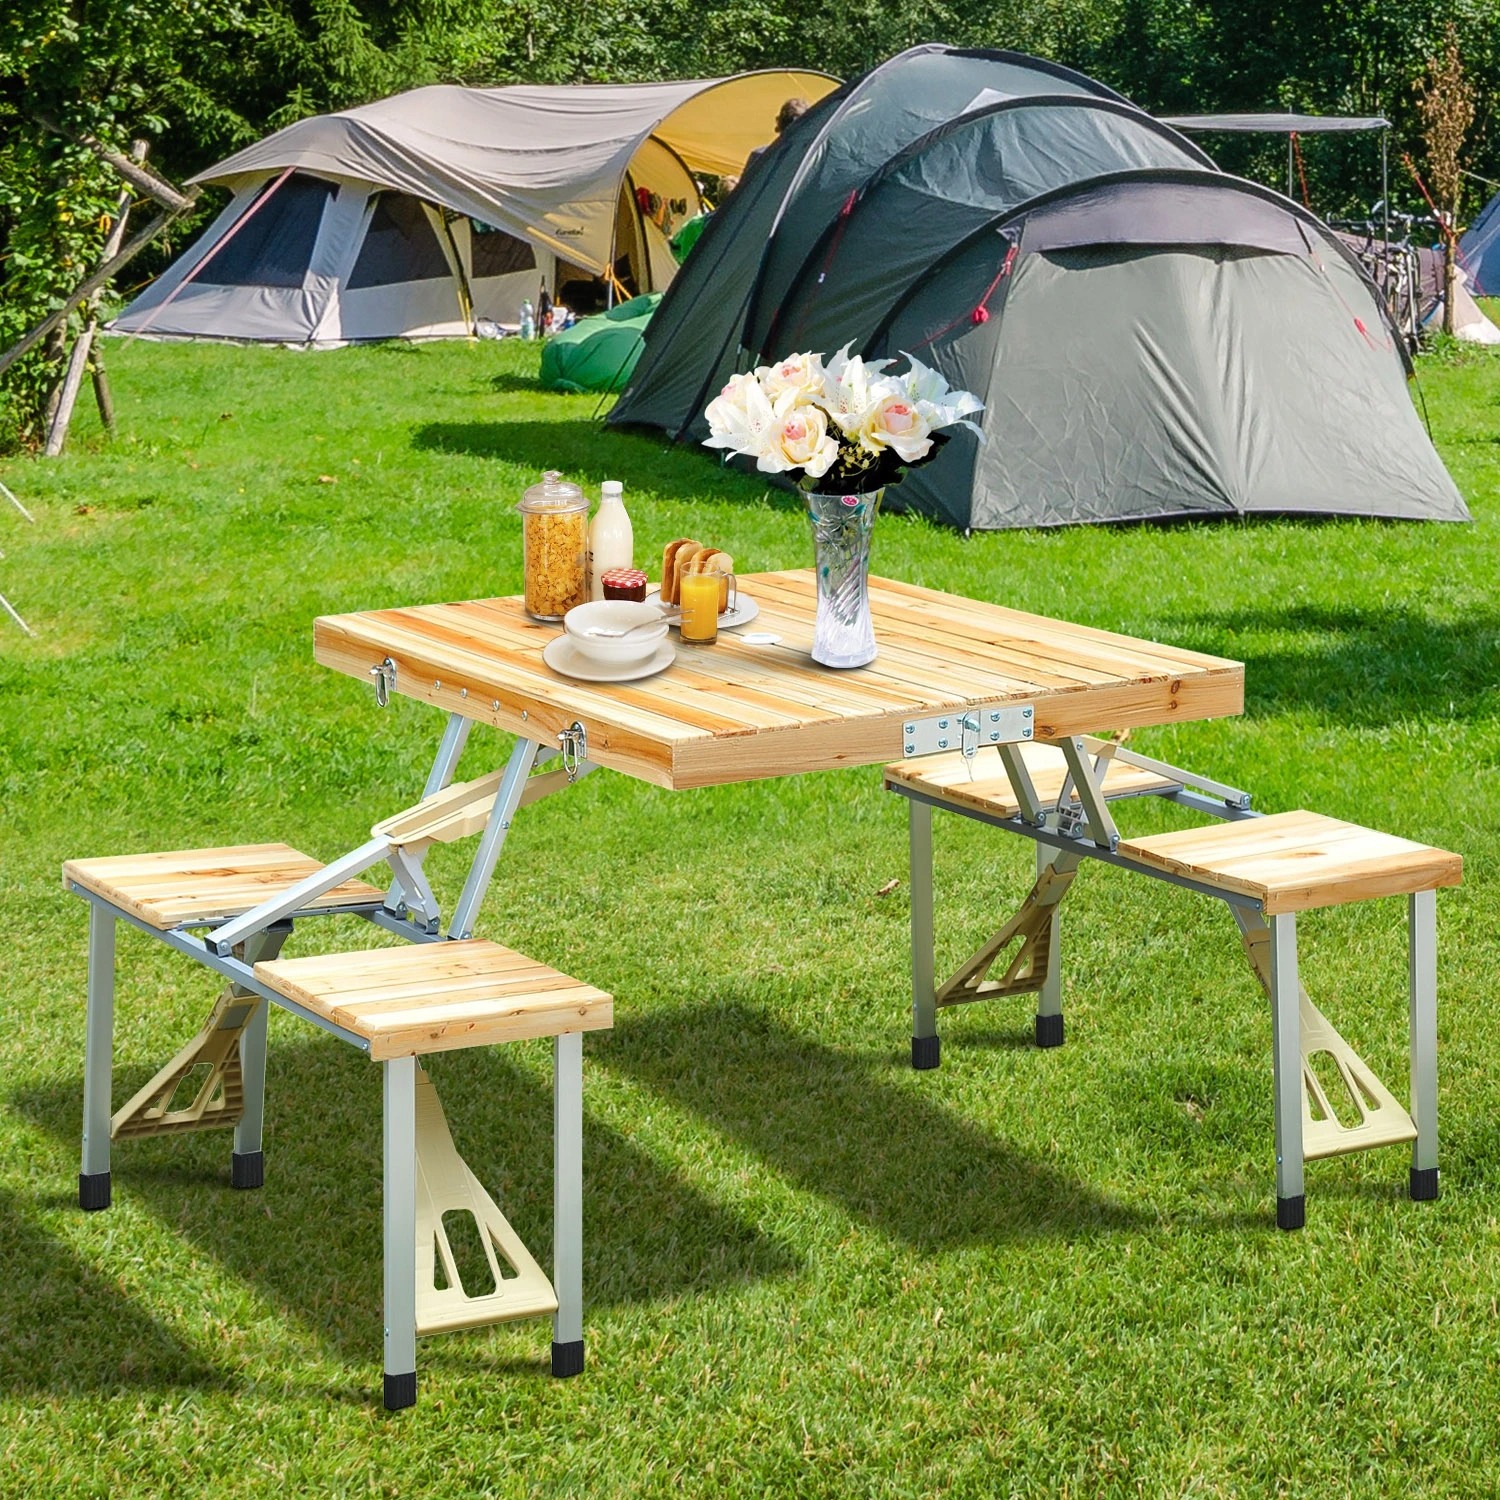 4 Person Wooden Portable Folding Picnic Table Set with Umbrella Hole